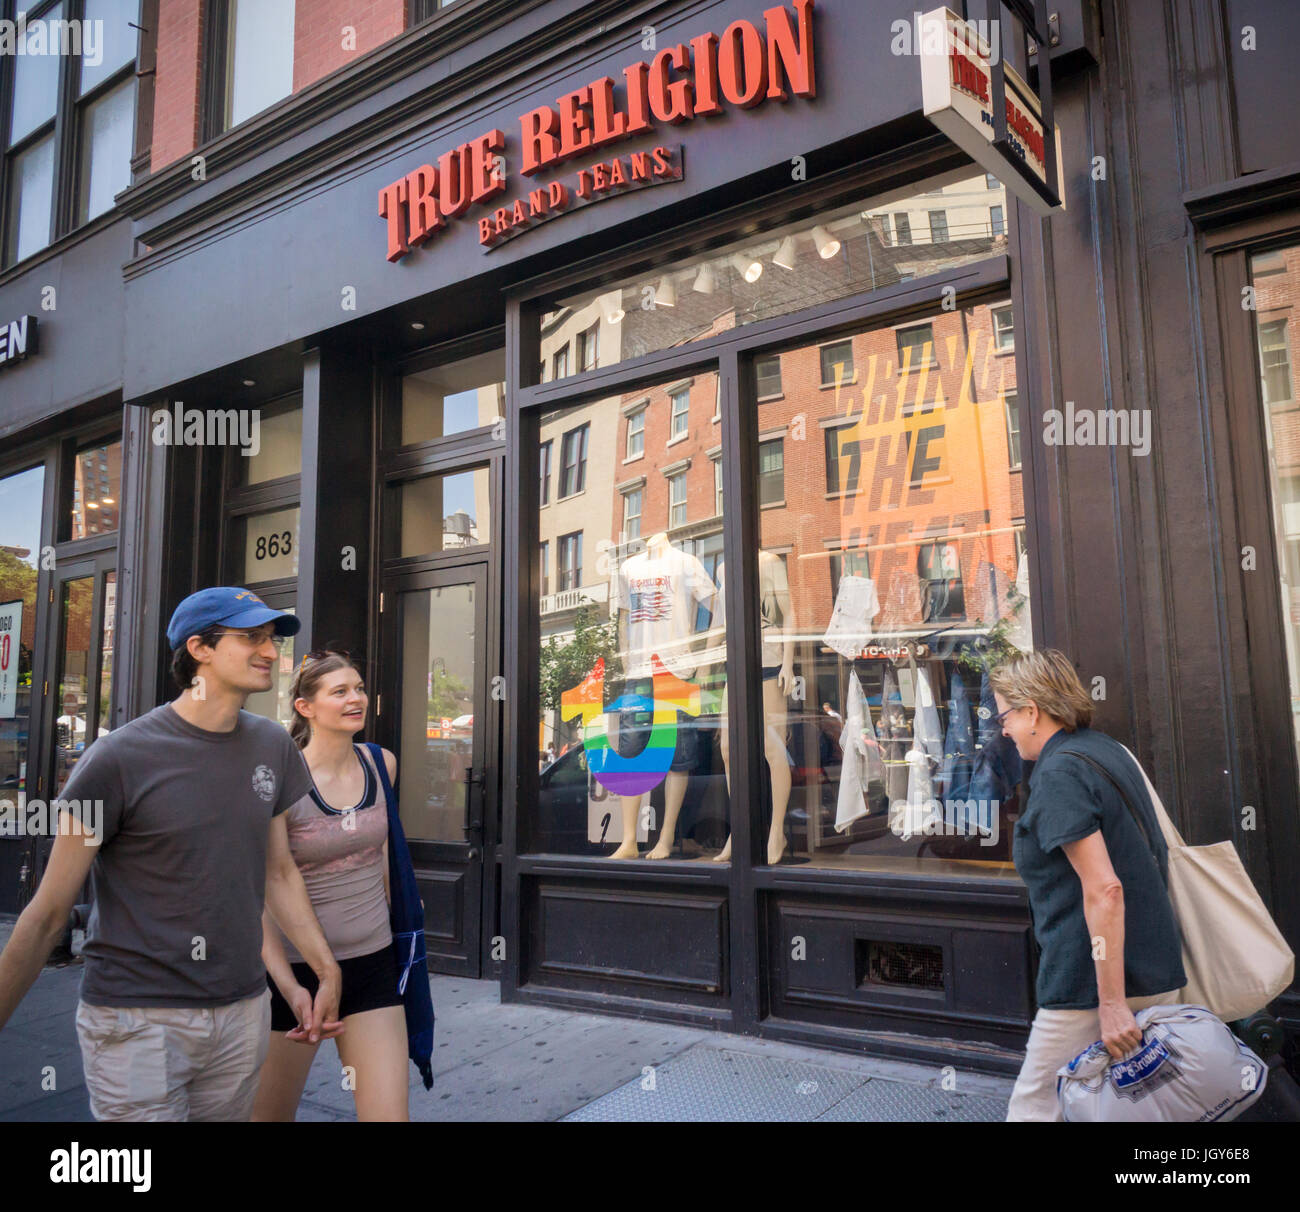 A True Religion jeans store in New York on Wednesday, July 5, 2017. Saddled  with debt, True Religion has joined other retailers and has filed for a  pre-packaged Chapter 11 bankruptcy. (©